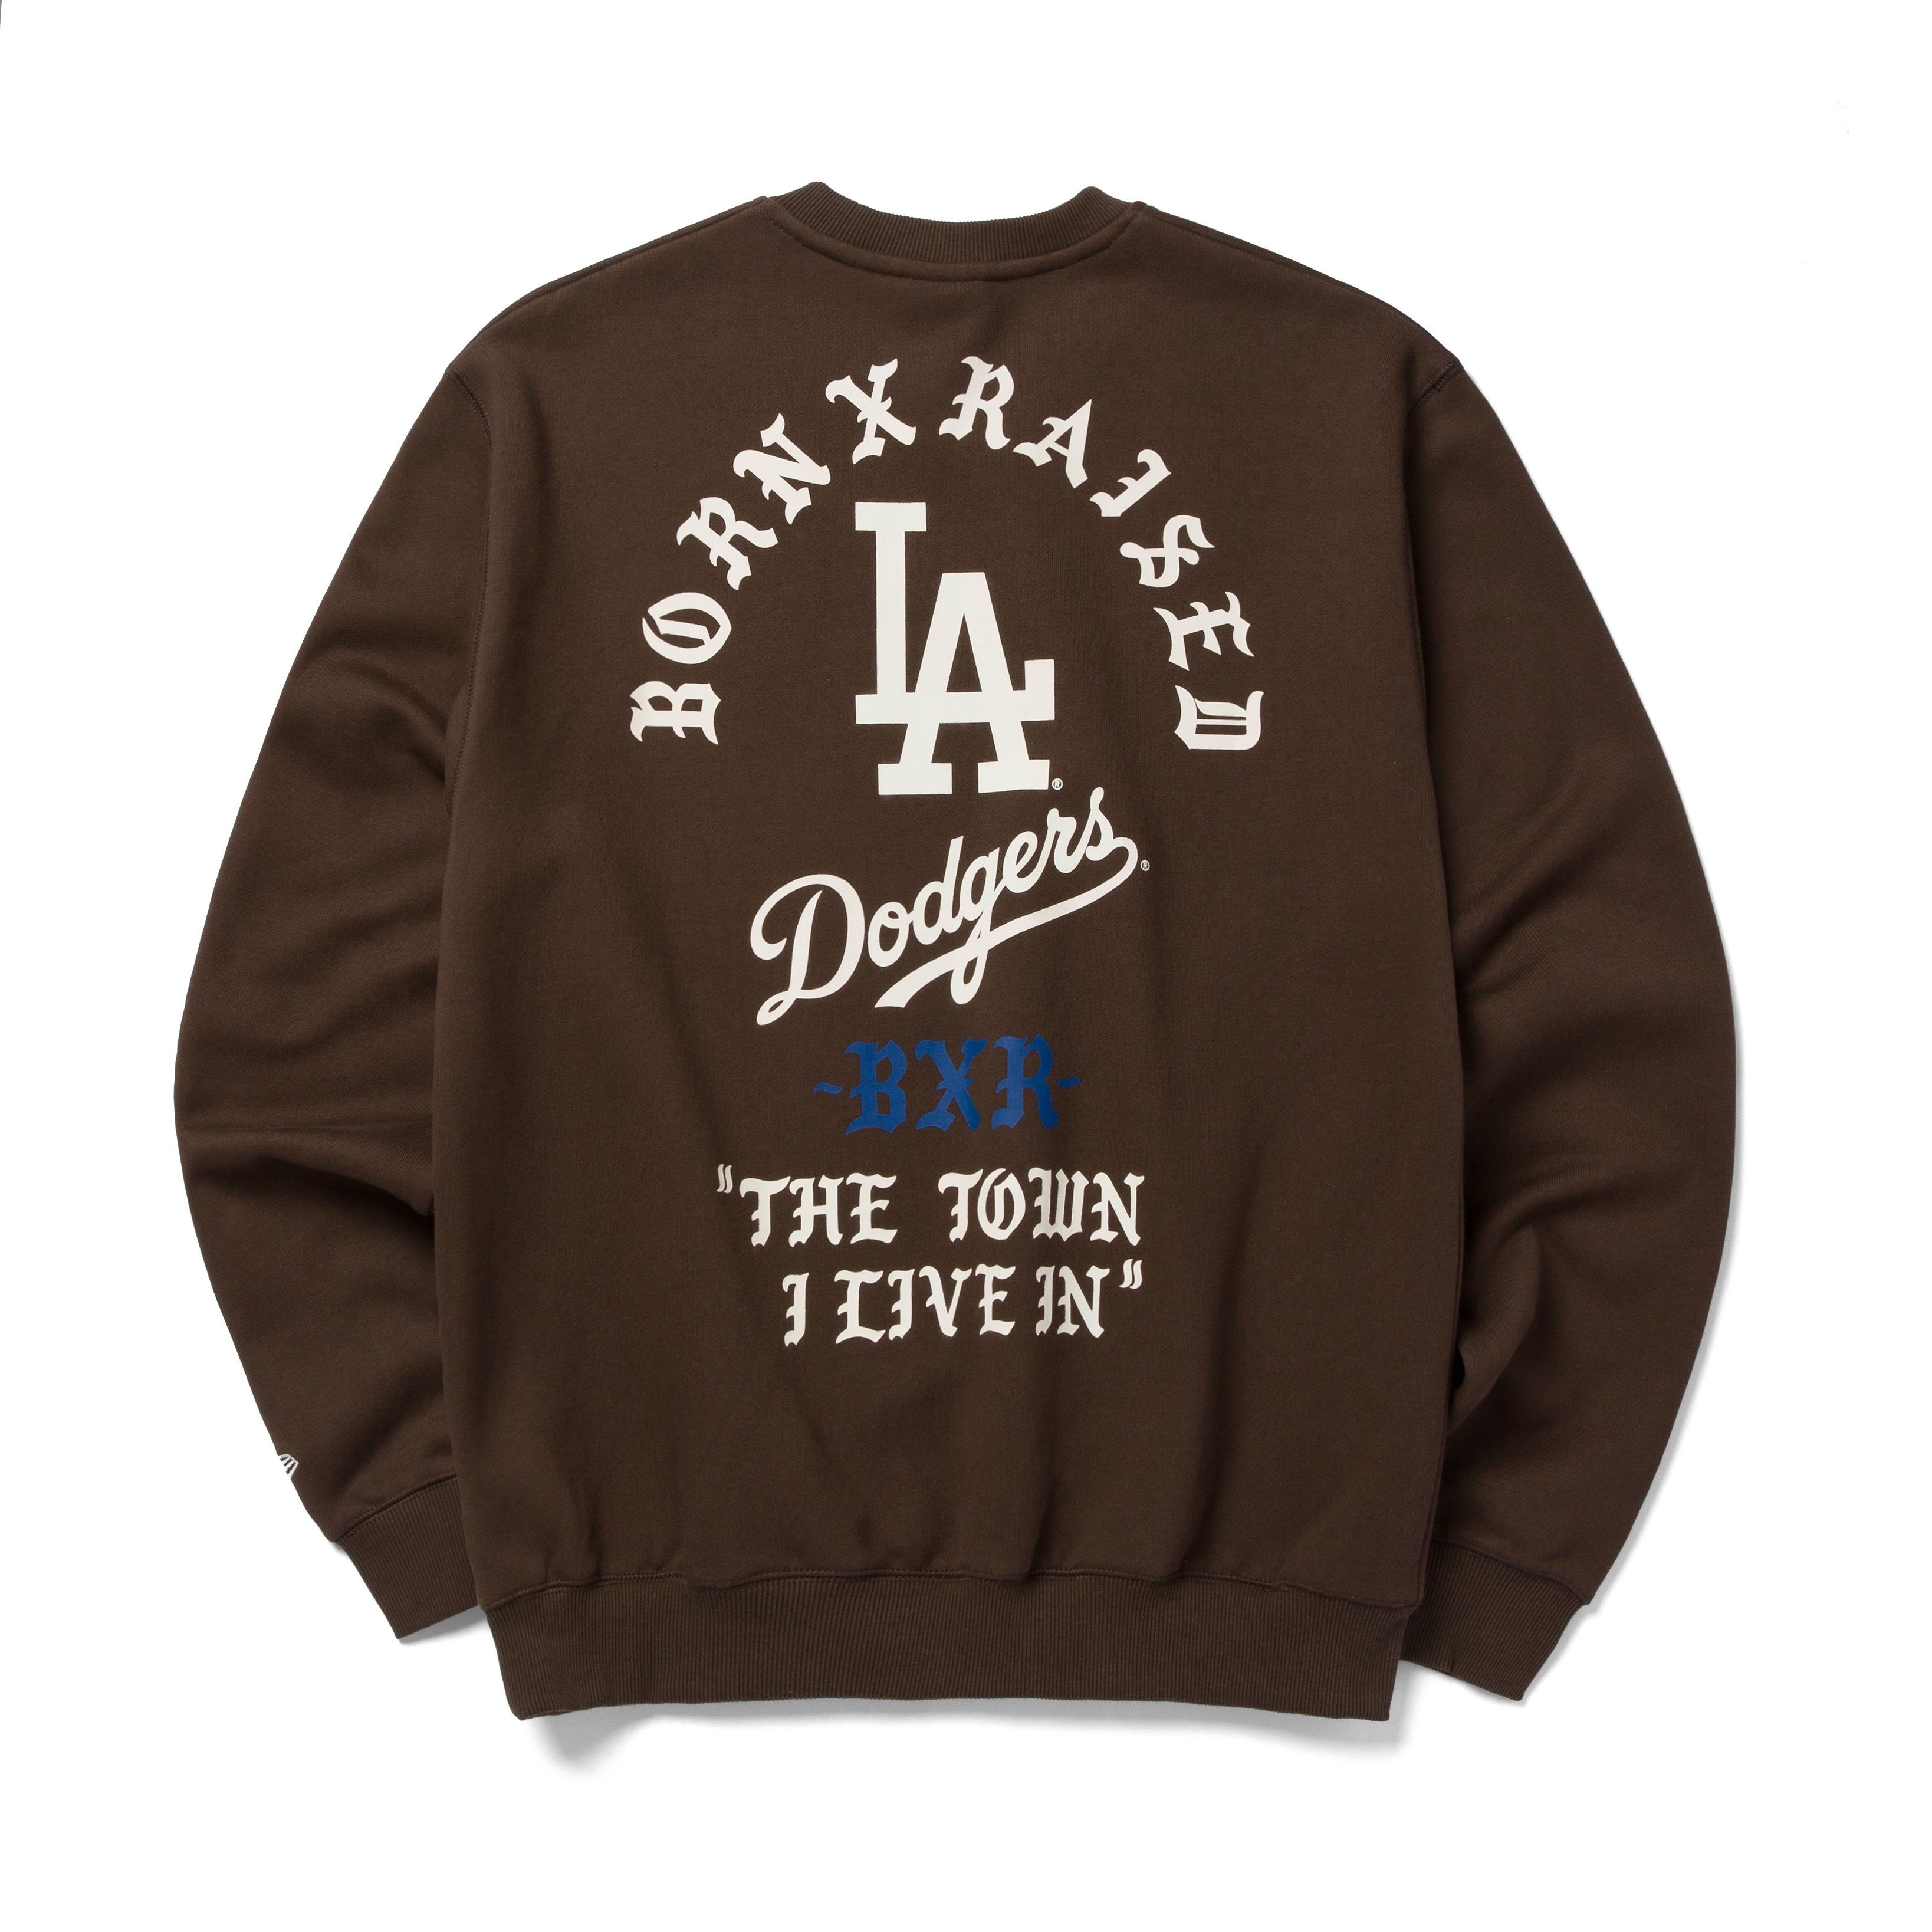 Los Angeles Dodgers on X: For Spanto. The Dodgers x Born x Raised merch  will be available for purchase starting today at the Top of the Park or  Left Field store at